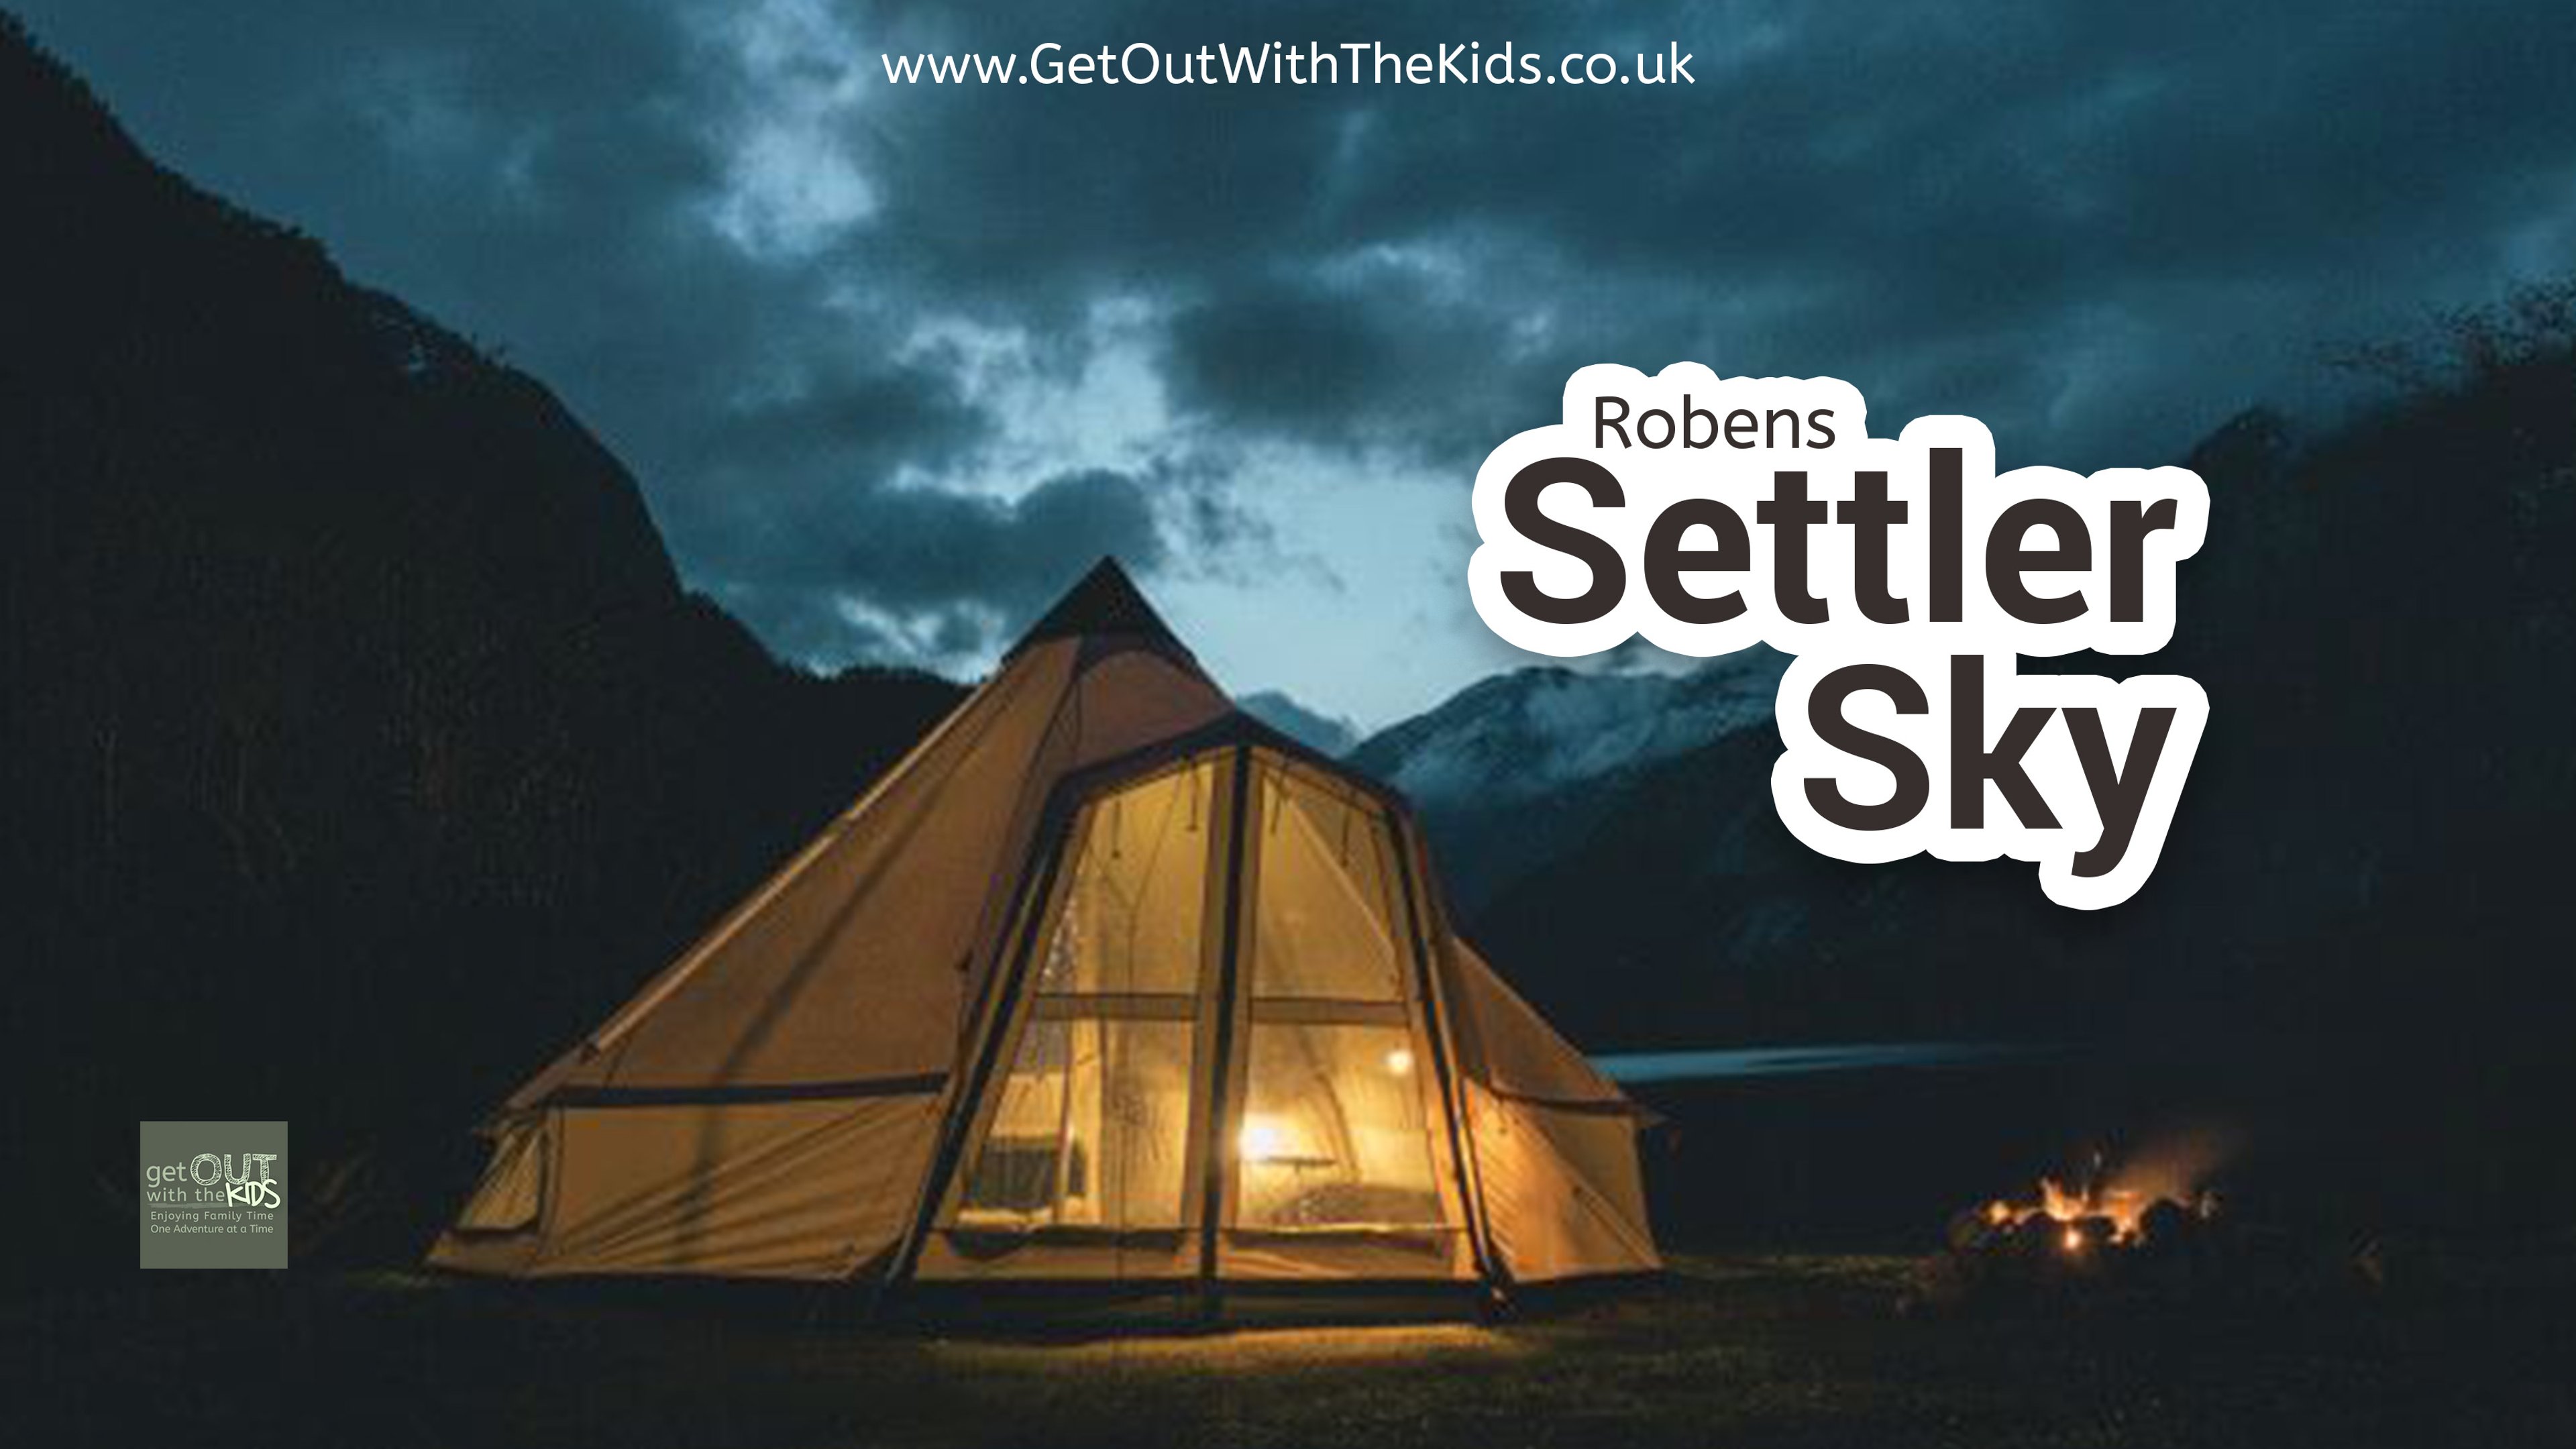 View of the Robens Settler Sky tent in a mountain valley at night